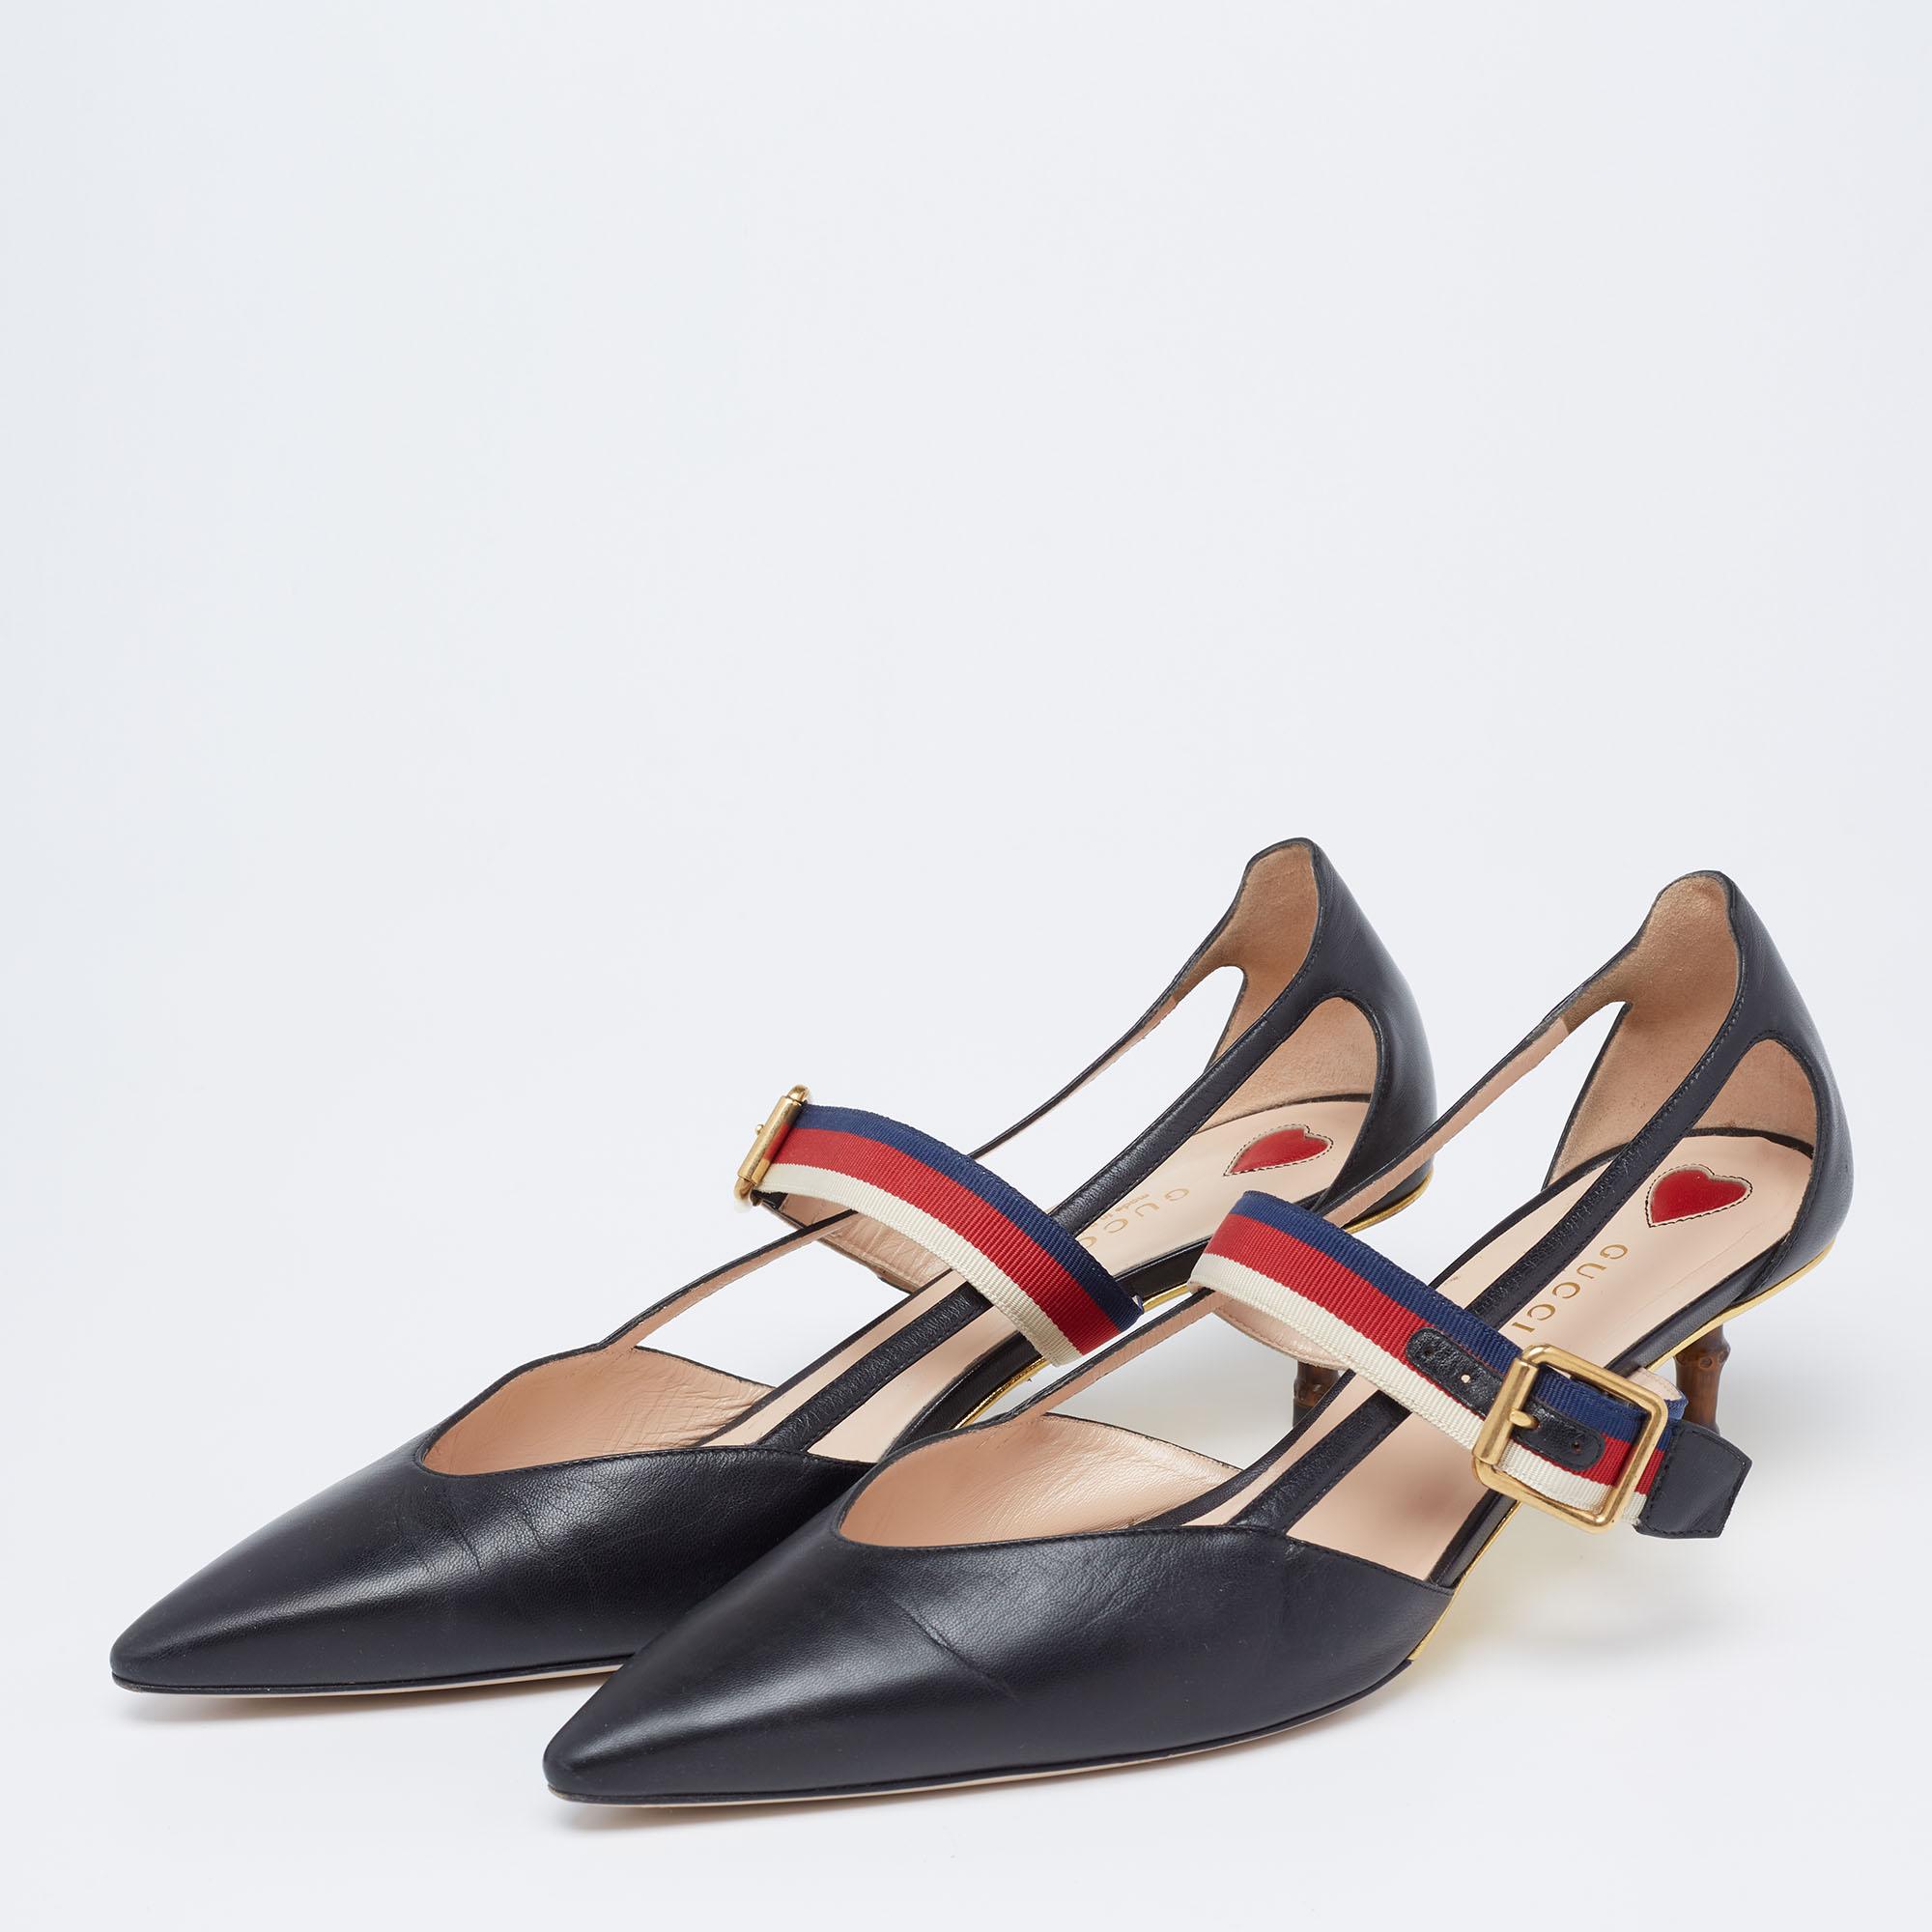 These pointed-toe pumps from Gucci have come straight from a shoe lover's dream. Crafted from black leather, detailed with signature Web straps, and balanced on low bamboo heels, the pumps are fashionable and gorgeous!

Includes: Original Box, Info